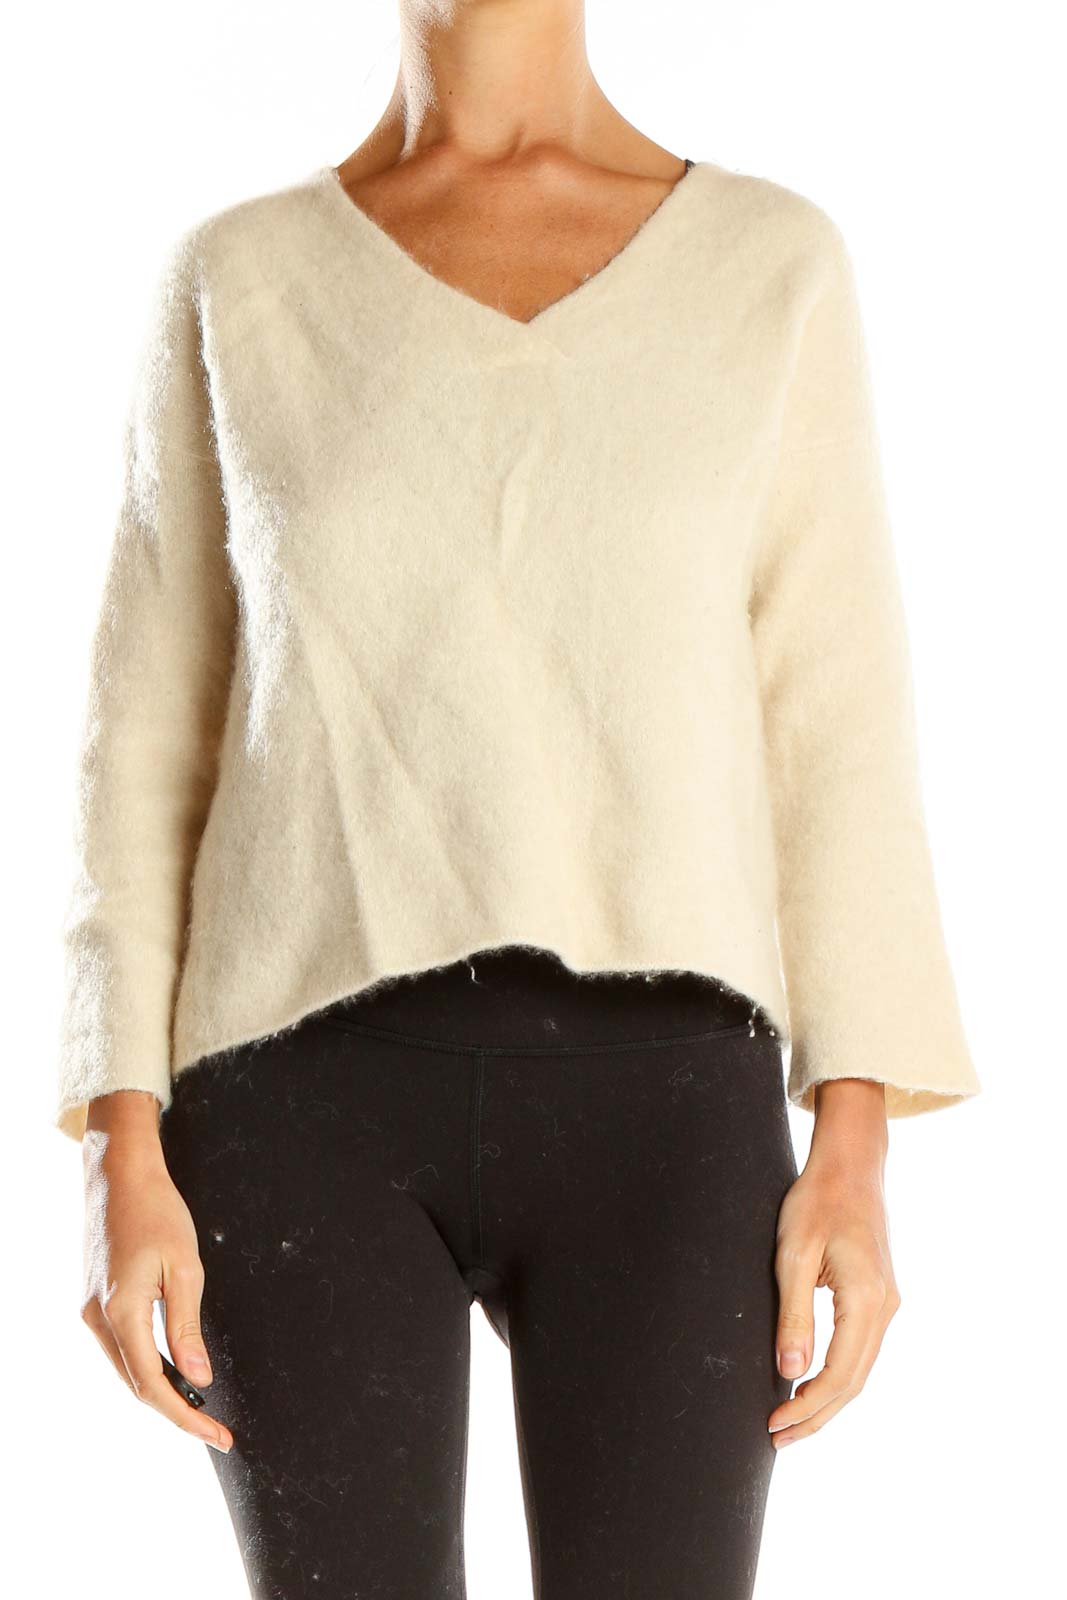 Cream All Day Wear Sweater Front